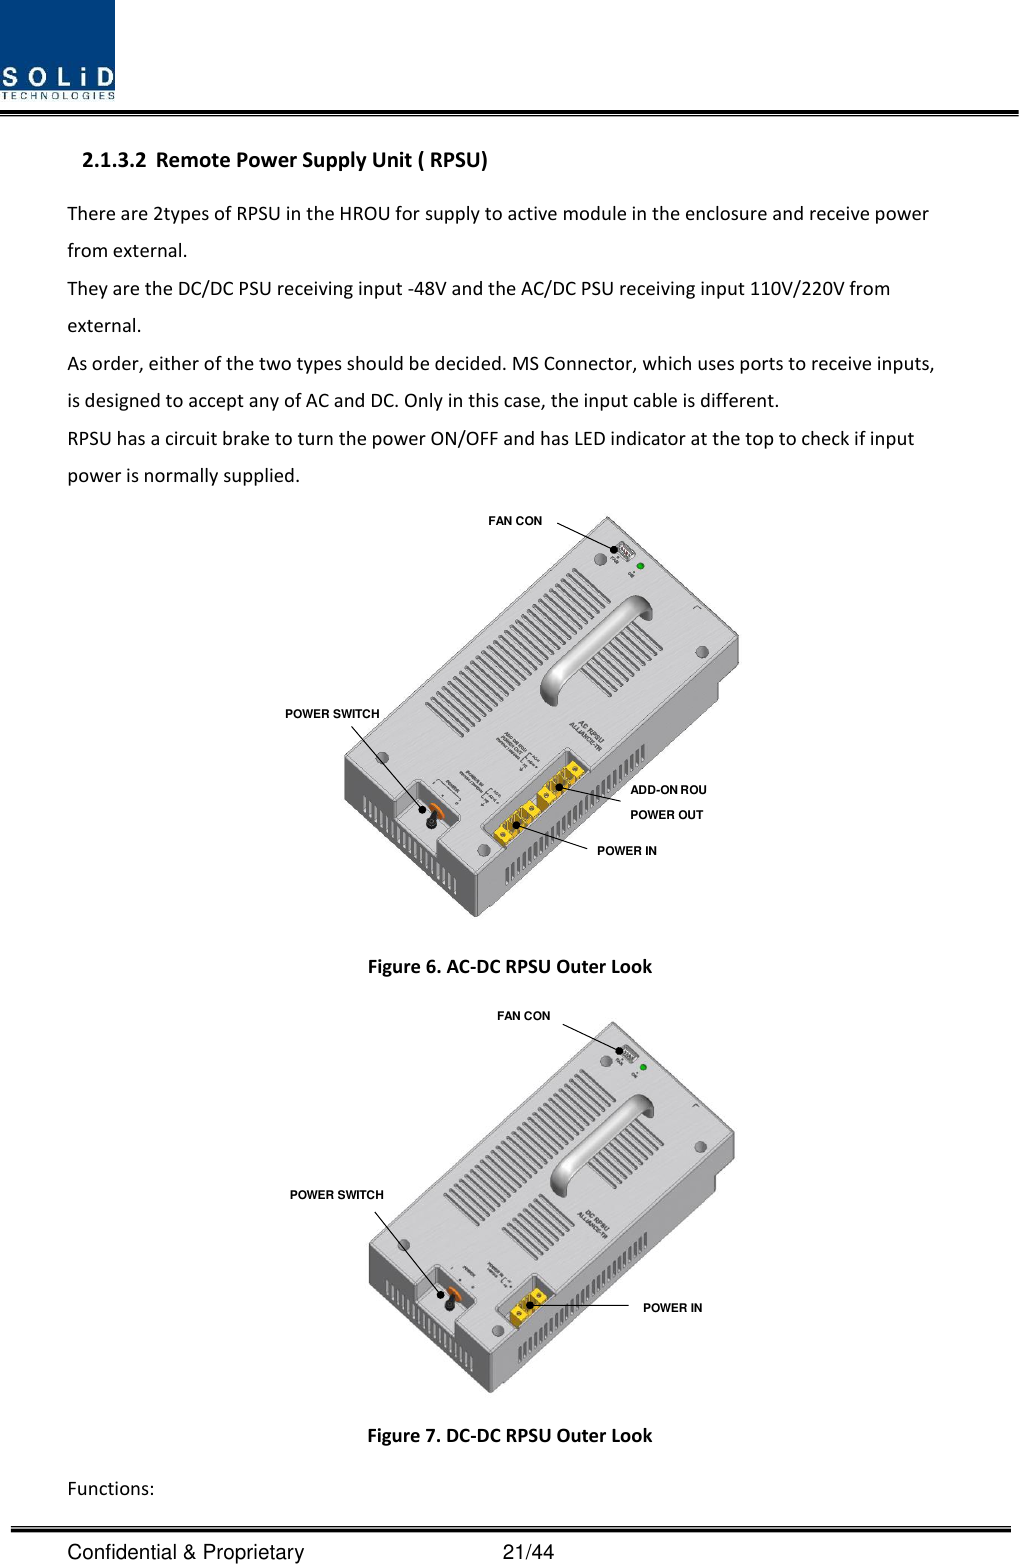  Confidential &amp; Proprietary                                      21/44 2.1.3.2 Remote Power Supply Unit ( RPSU) There are 2types of RPSU in the HROU for supply to active module in the enclosure and receive power from external.   They are the DC/DC PSU receiving input -48V and the AC/DC PSU receiving input 110V/220V from external. As order, either of the two types should be decided. MS Connector, which uses ports to receive inputs, is designed to accept any of AC and DC. Only in this case, the input cable is different. RPSU has a circuit brake to turn the power ON/OFF and has LED indicator at the top to check if input power is normally supplied.  Figure 6. AC-DC RPSU Outer Look  Figure 7. DC-DC RPSU Outer Look Functions: POWER SWITCHFAN CONPOWER INADD-ON ROU POWER OUTPOWER INPOWER SWITCHFAN CON